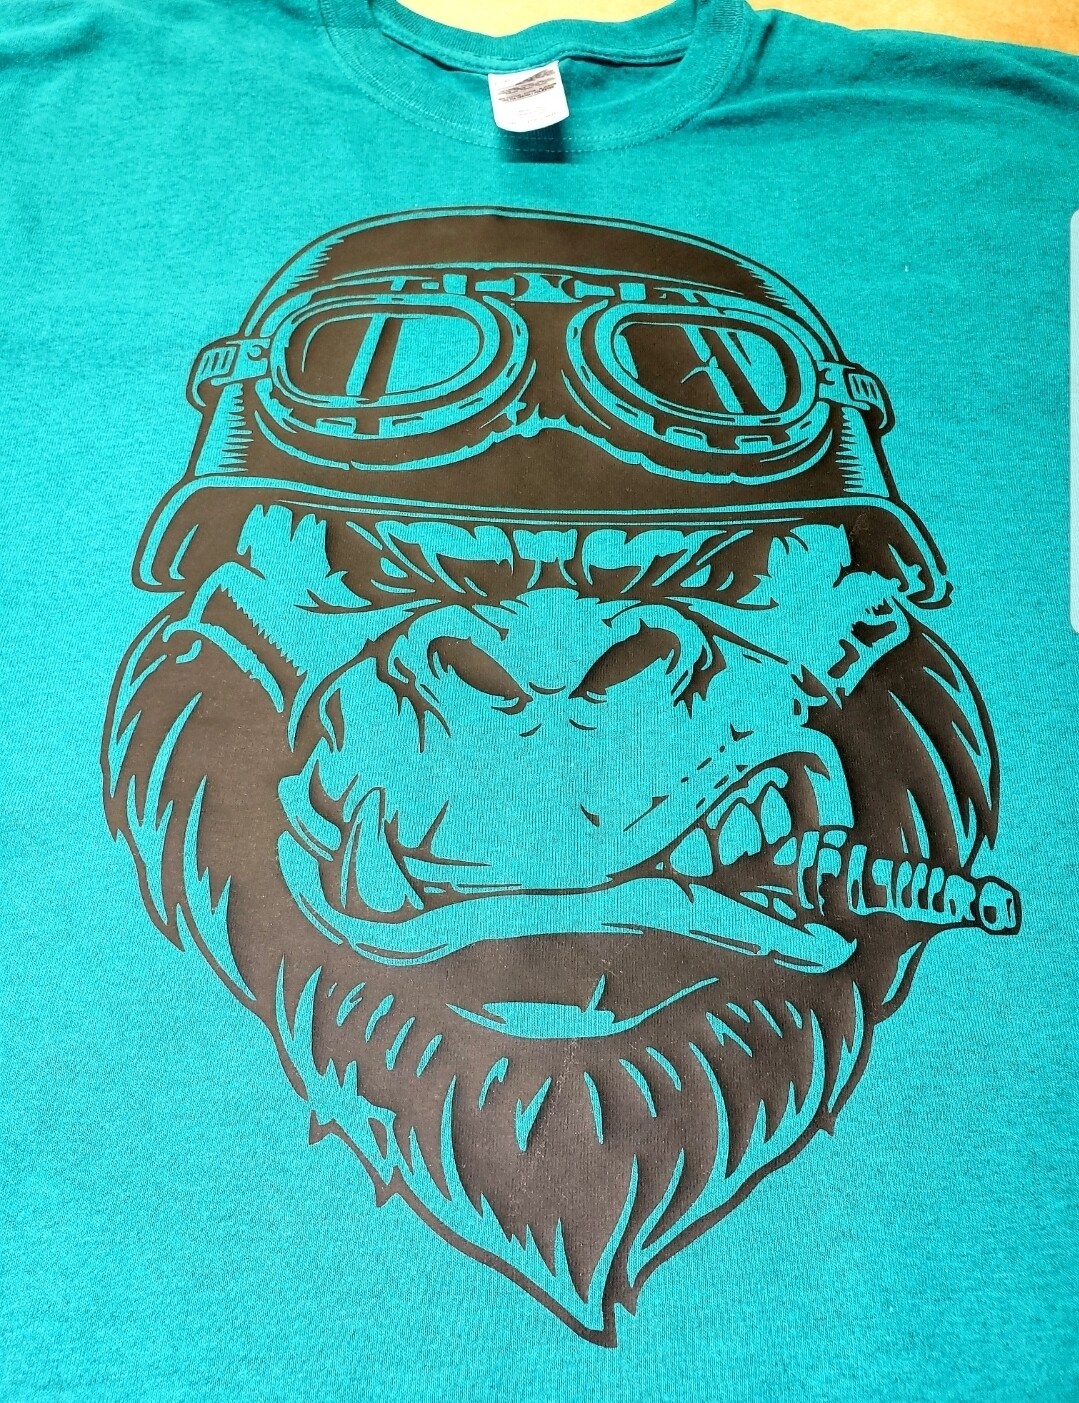 Gorilla shirt with spark plug in mouth 